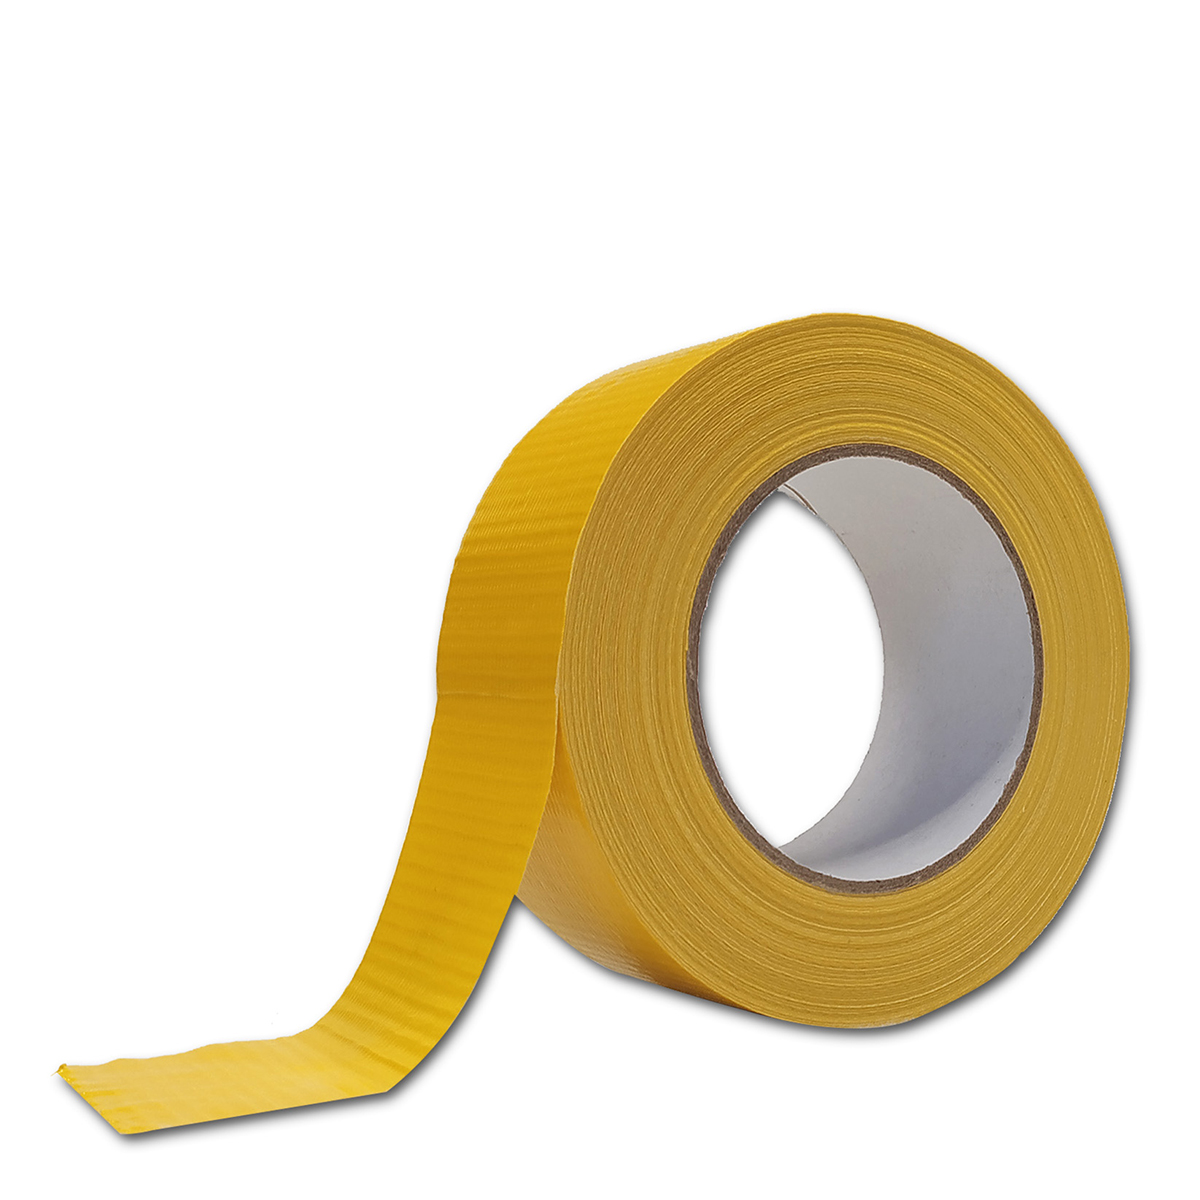 duct tape 48,5mm x 50m Yellow - verpacking